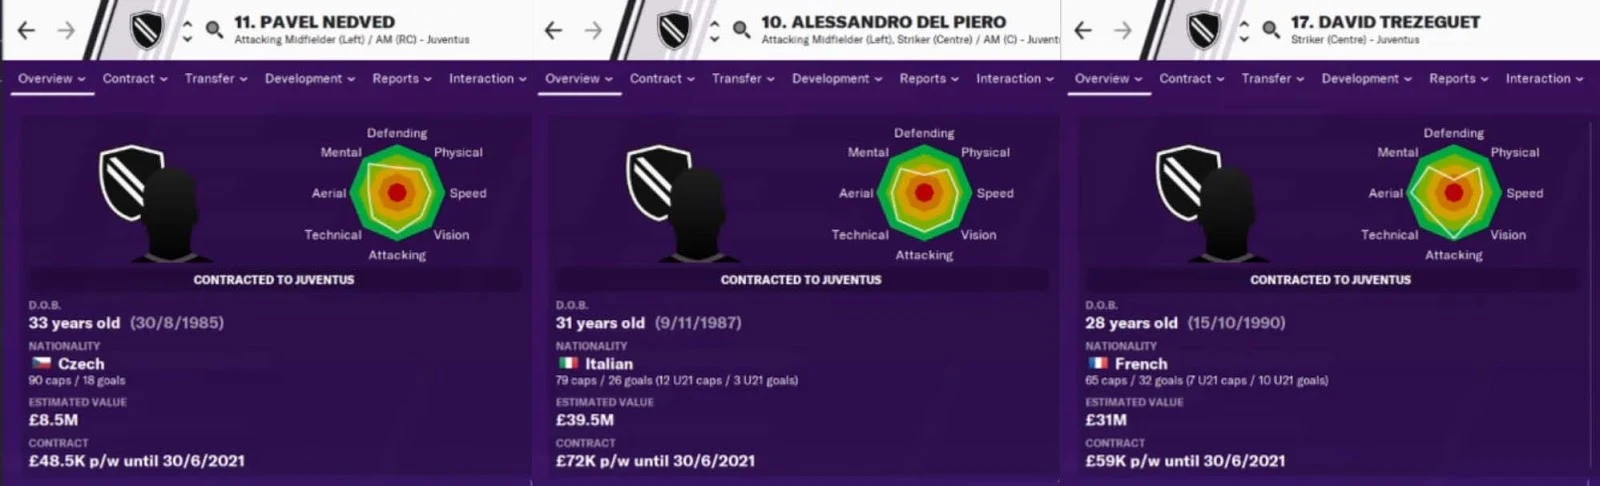 2006/07 Database for Football Manager 2020